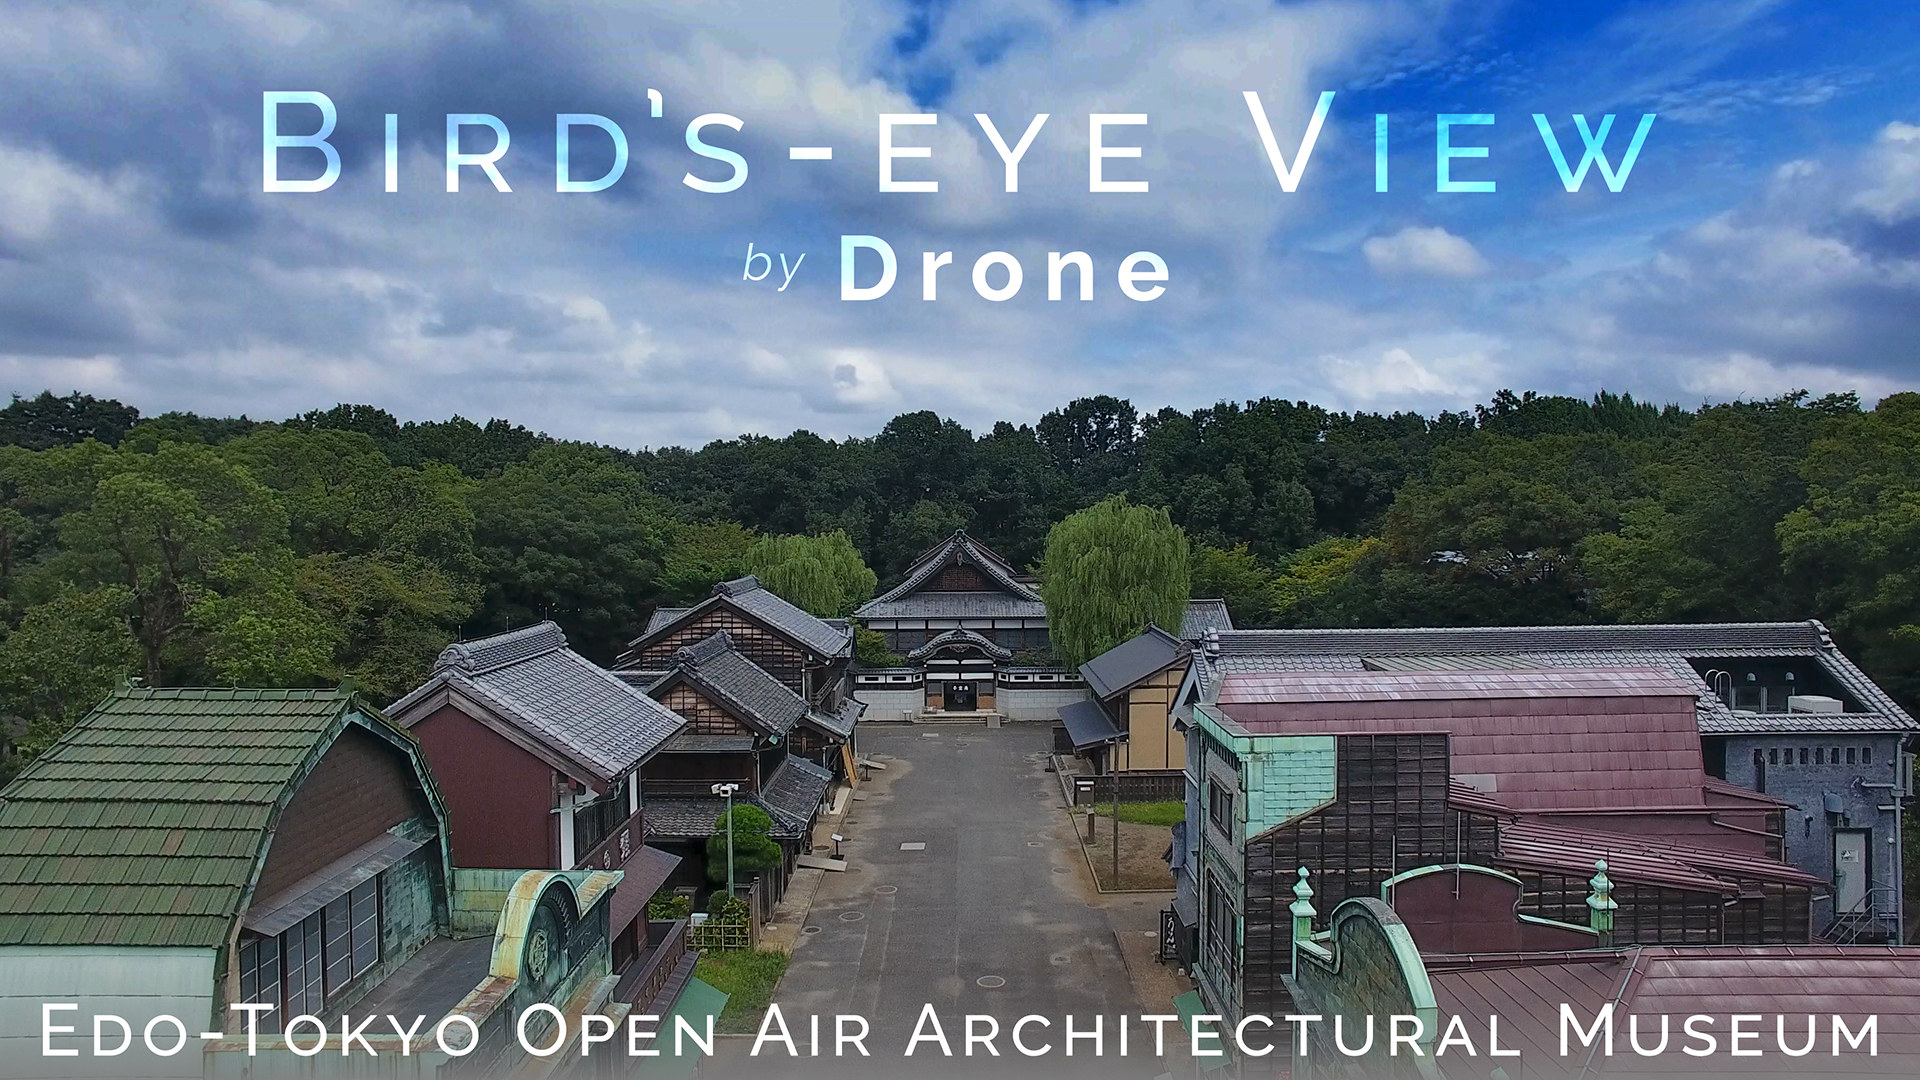 Bird’s-eye View – Edo-Tokyo Open Air Architectural Museum / by Drone